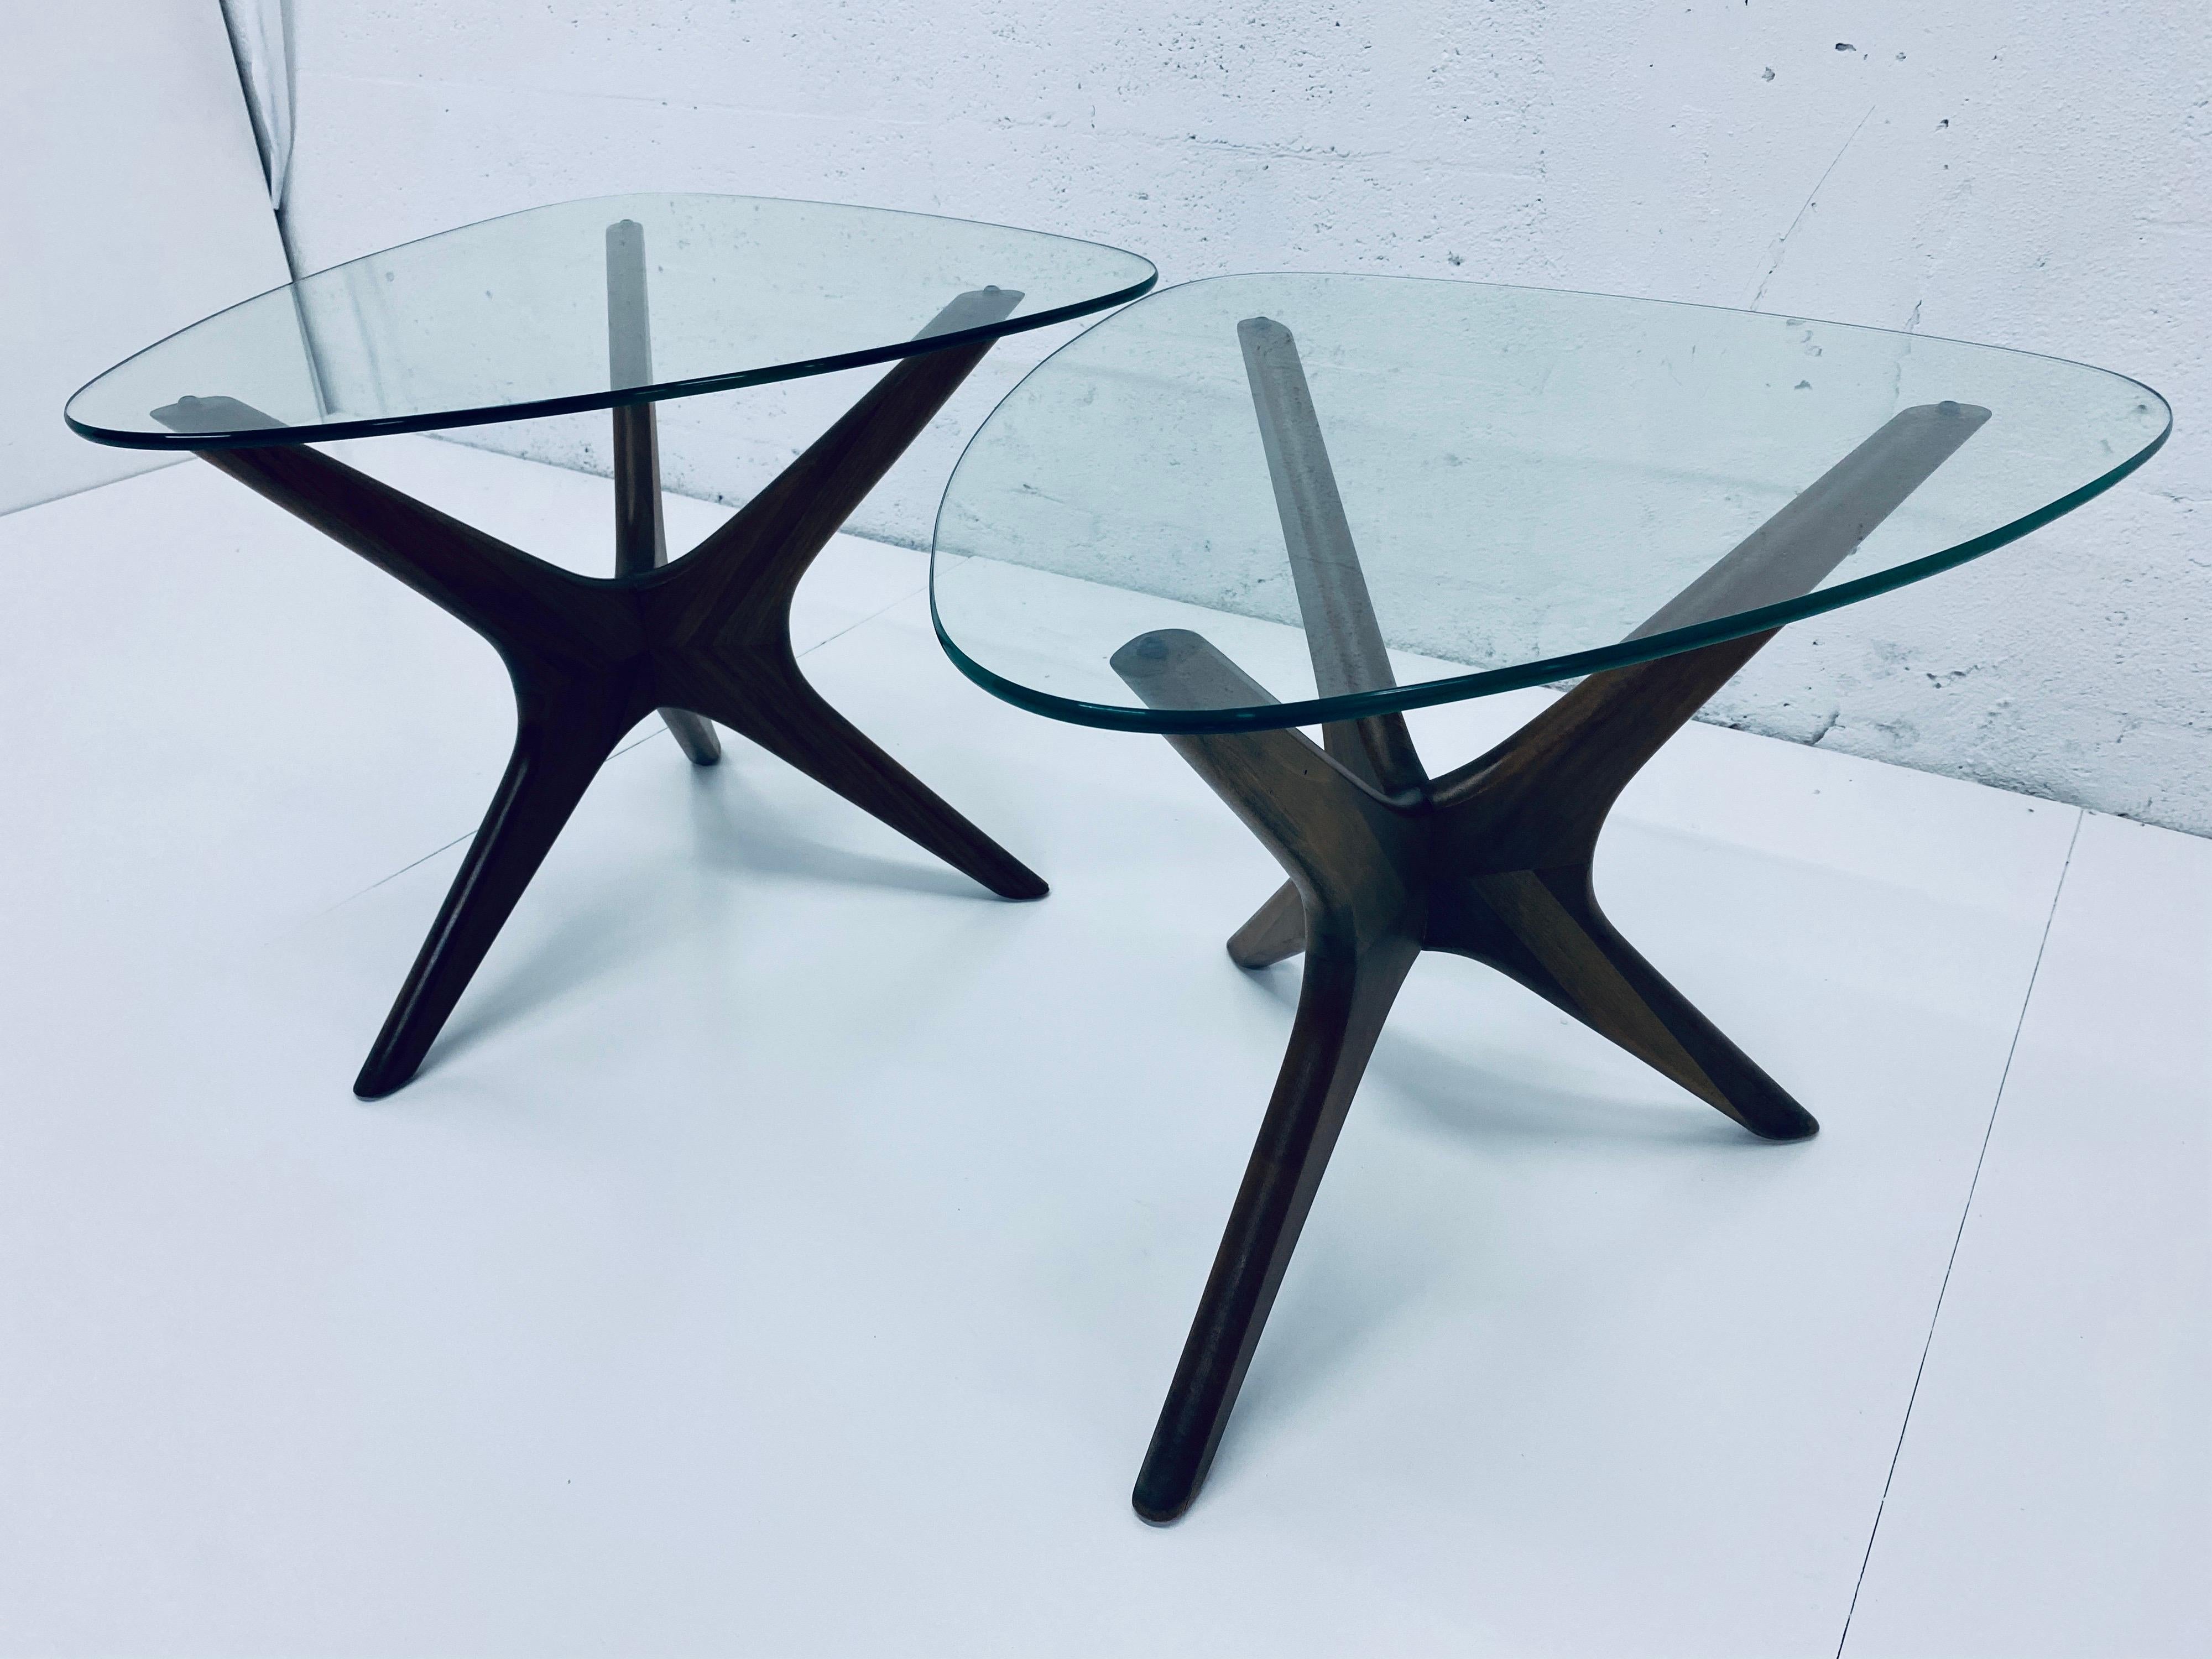 Pair of Mid-Century Modern walnut side tables with glass tops designed by Adrian Pearsall for Craft Associates.